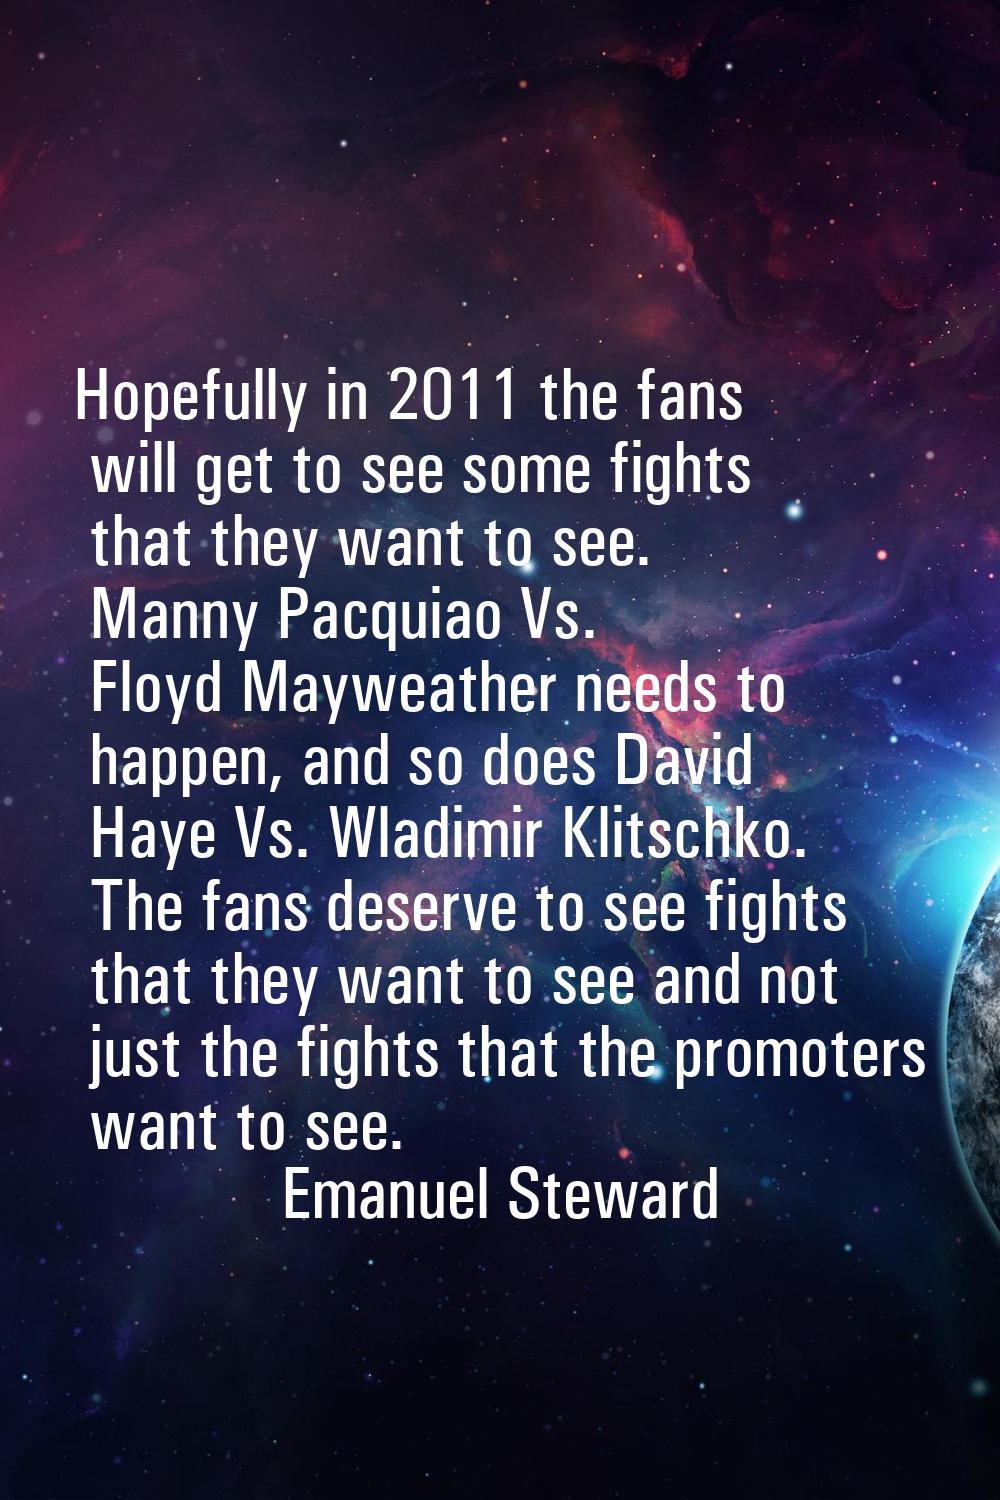 Hopefully in 2011 the fans will get to see some fights that they want to see. Manny Pacquiao Vs. Fl